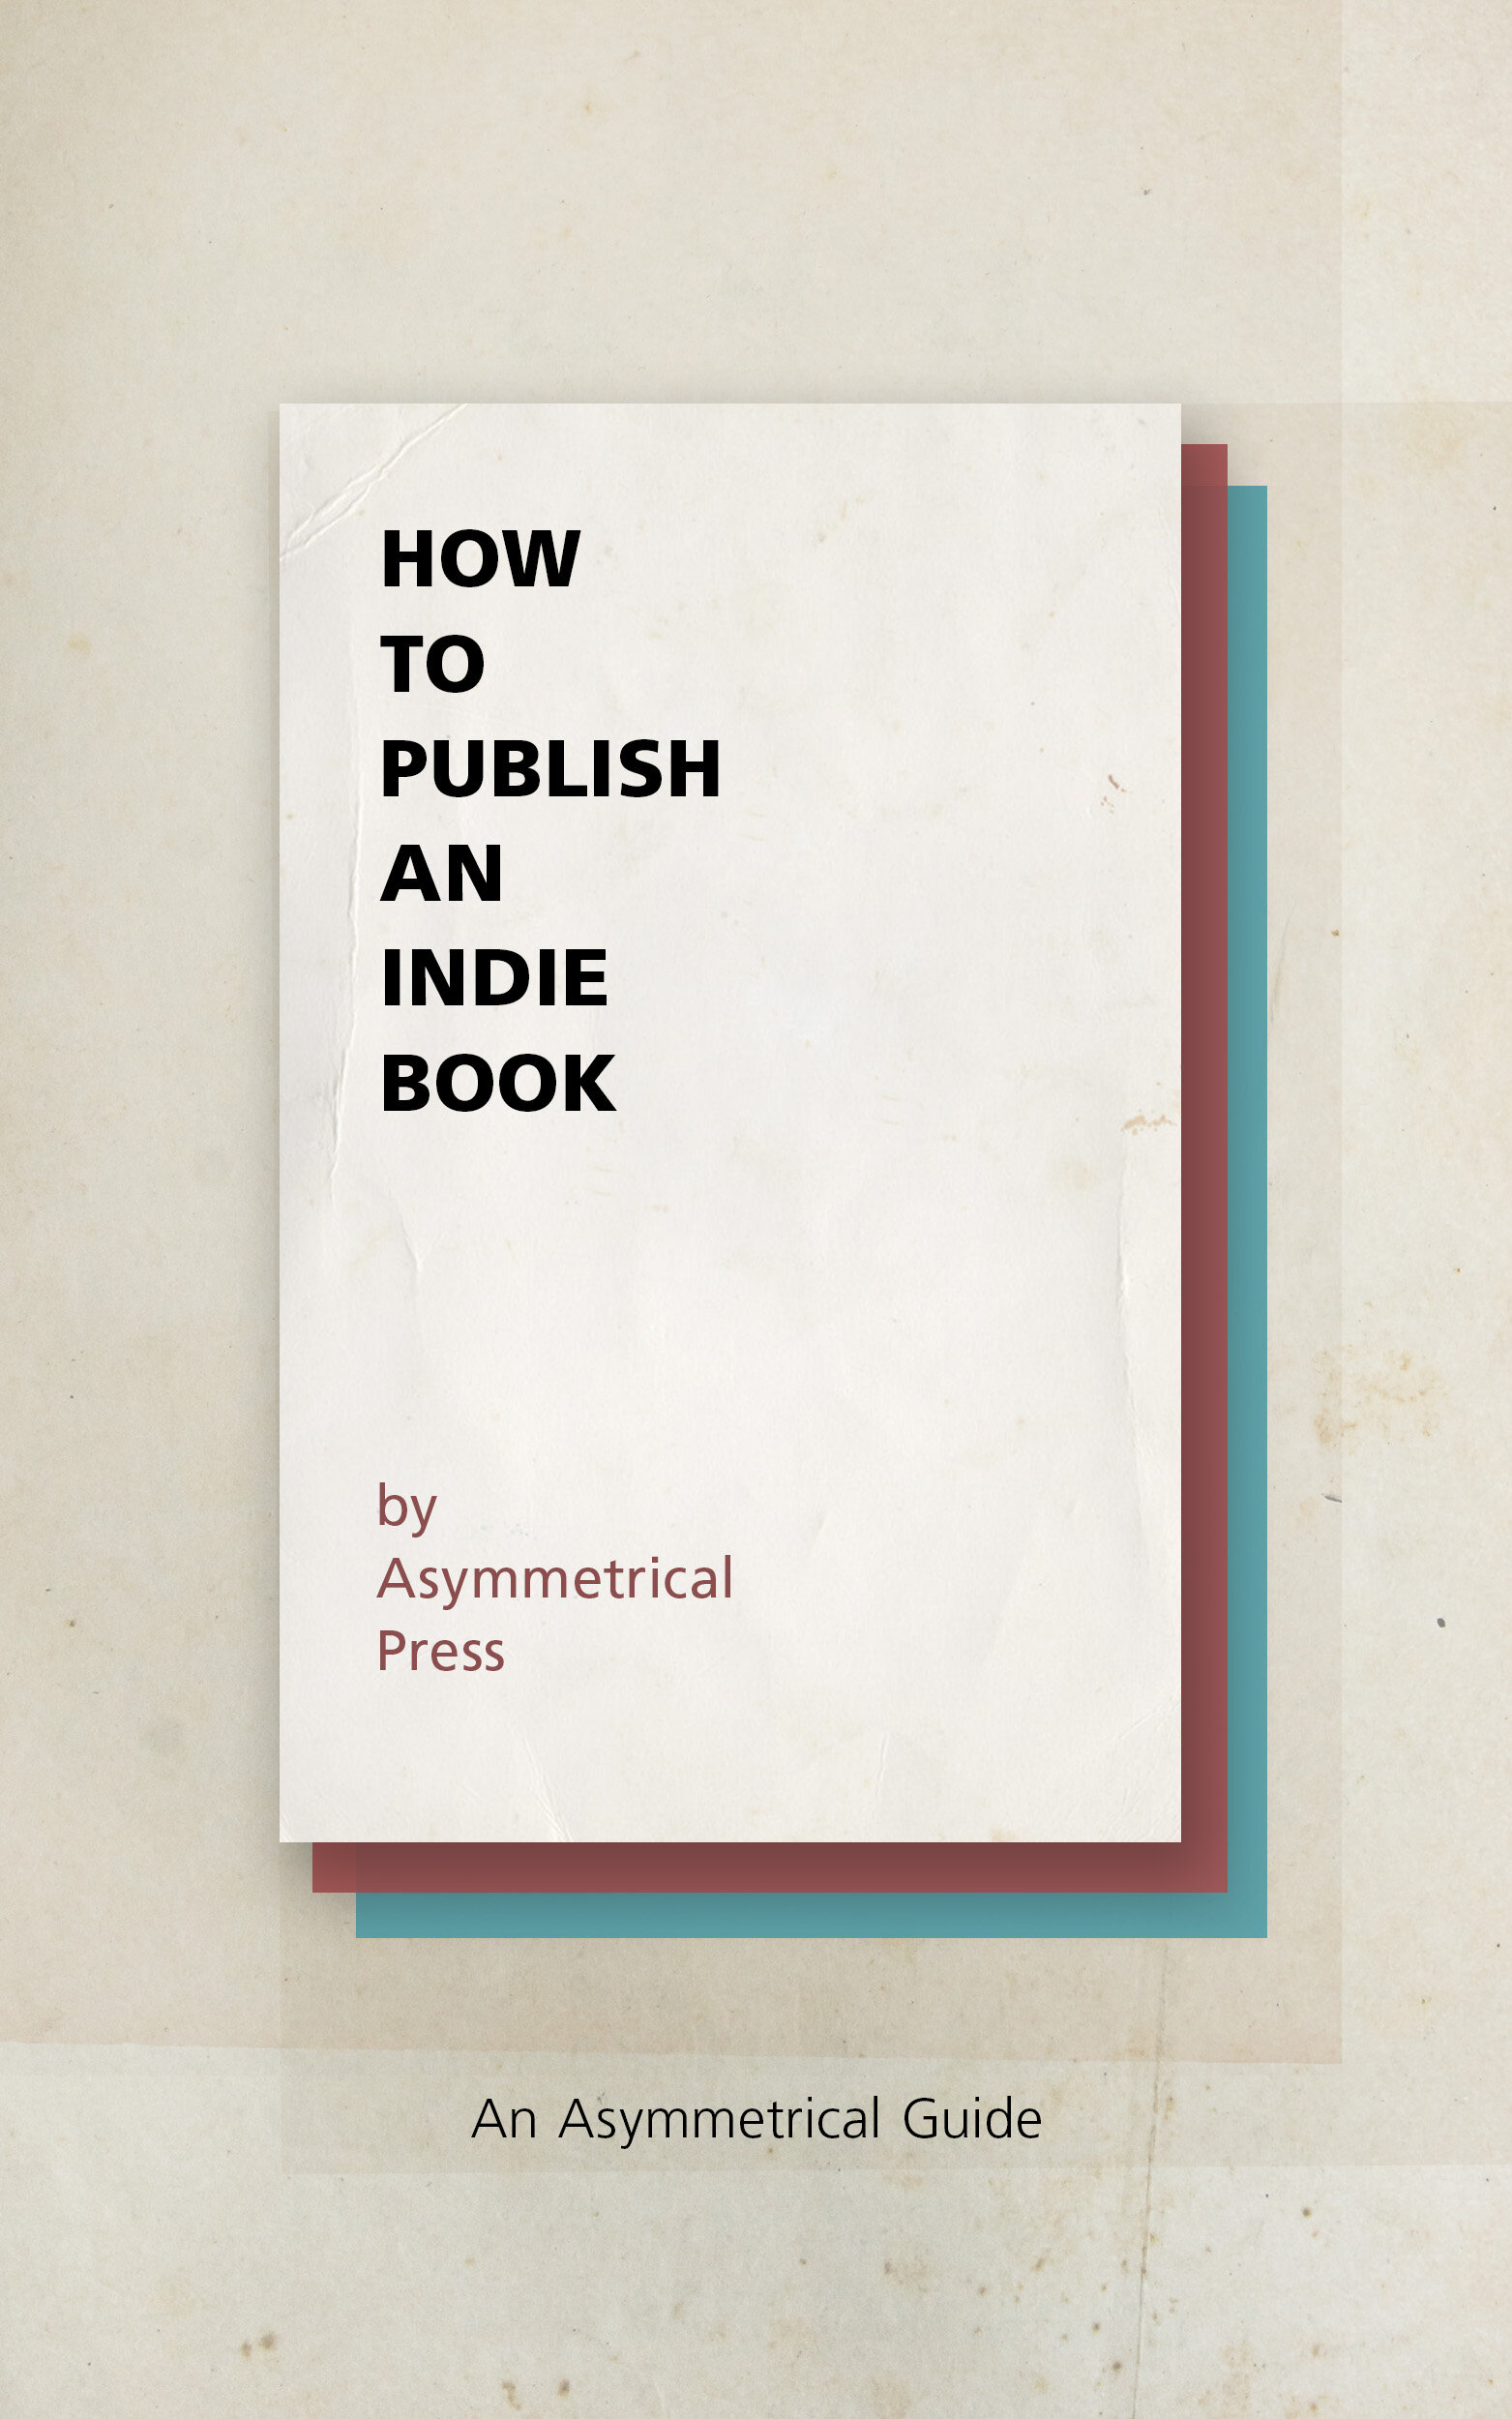   Title:  How to Publish an Indie Book  Publisher:   Asymmetrical Press   Release Date:  April 9, 2015  Genre:  Nonfiction / How-to  Length:  135 pages   Paperback    Amazon   Ebook   Kindle  |  Nook  |  Kobo  |  iBooks  |  Google Play  